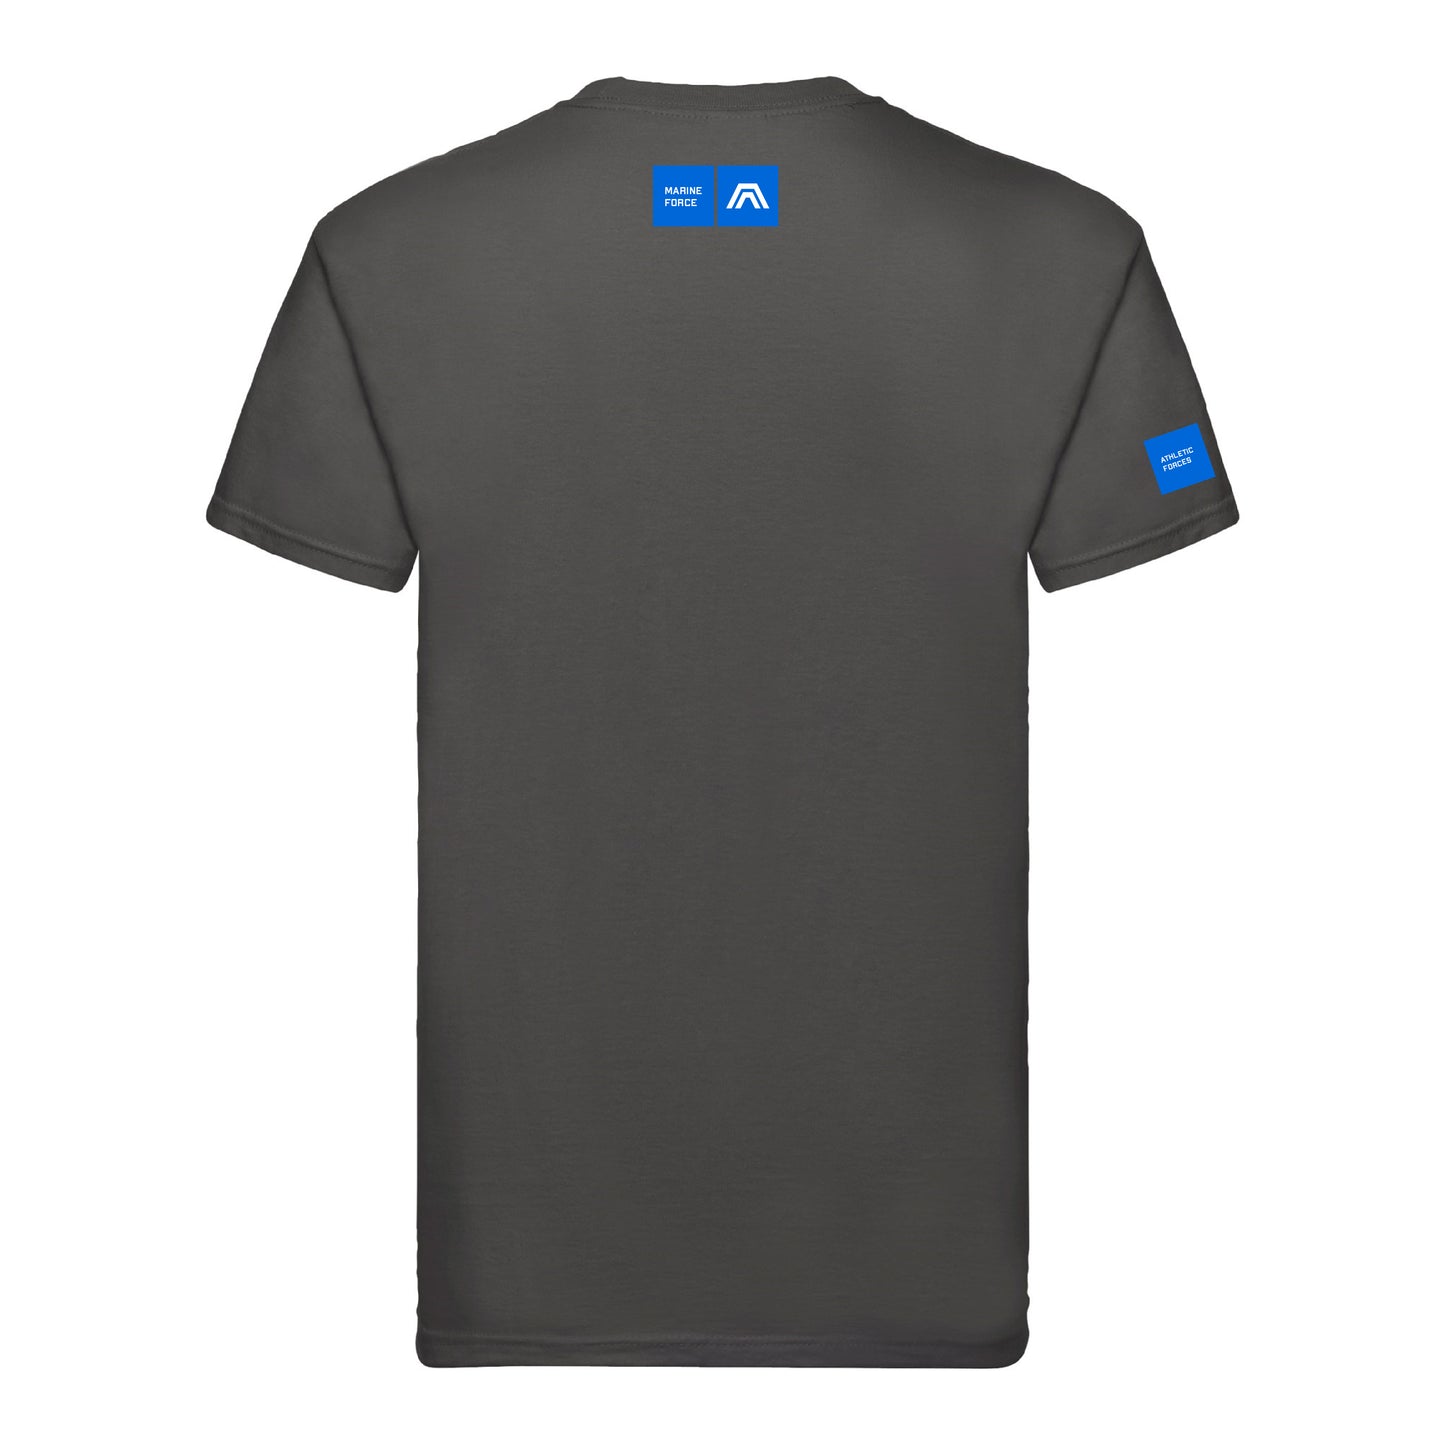 Marine Force Fluctuation T-Shirt